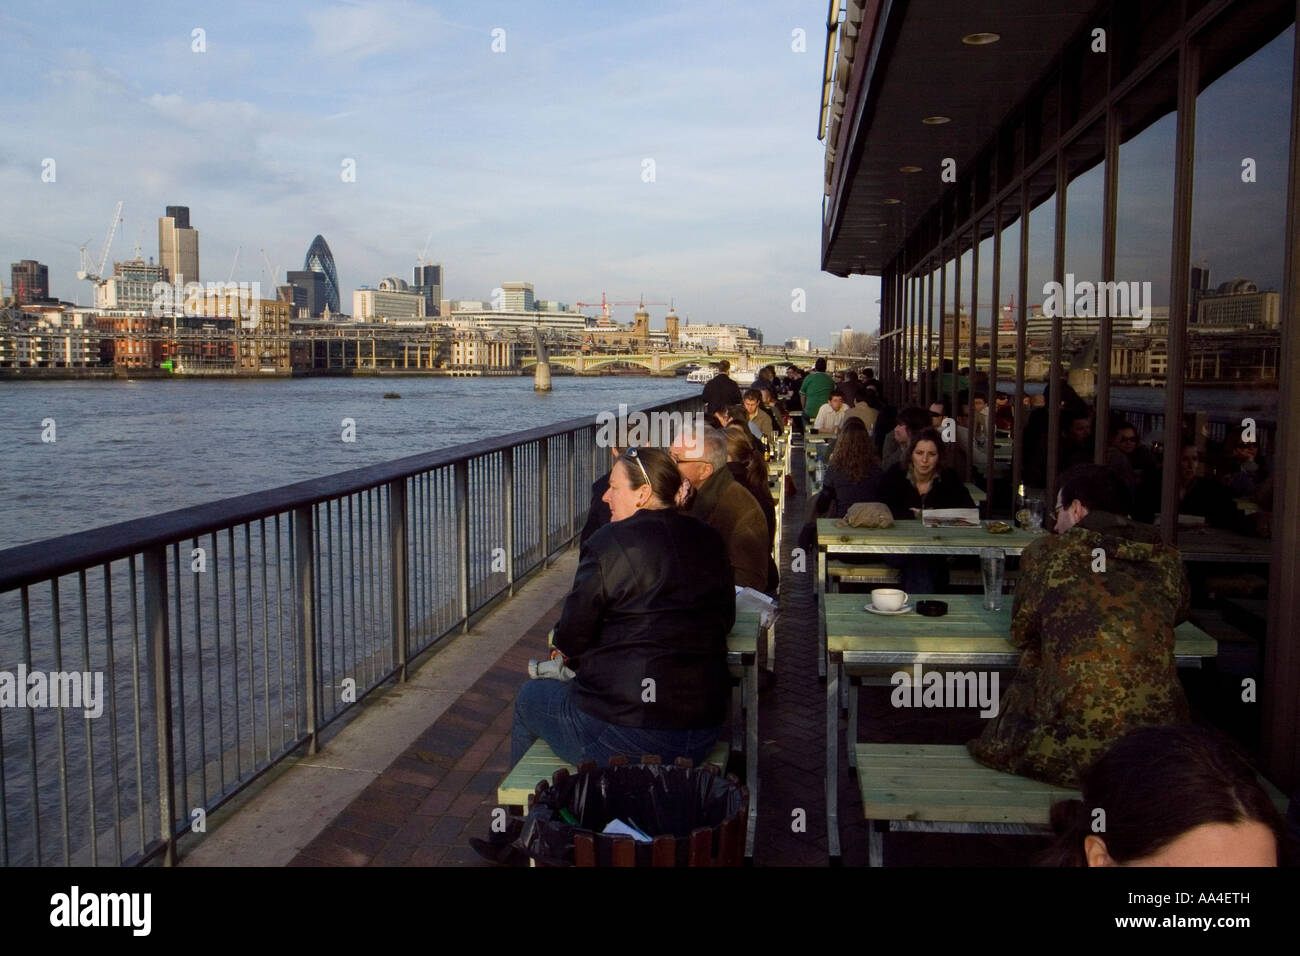 People enjoying a sunny spring day out on a river pub London UK Stock Photo